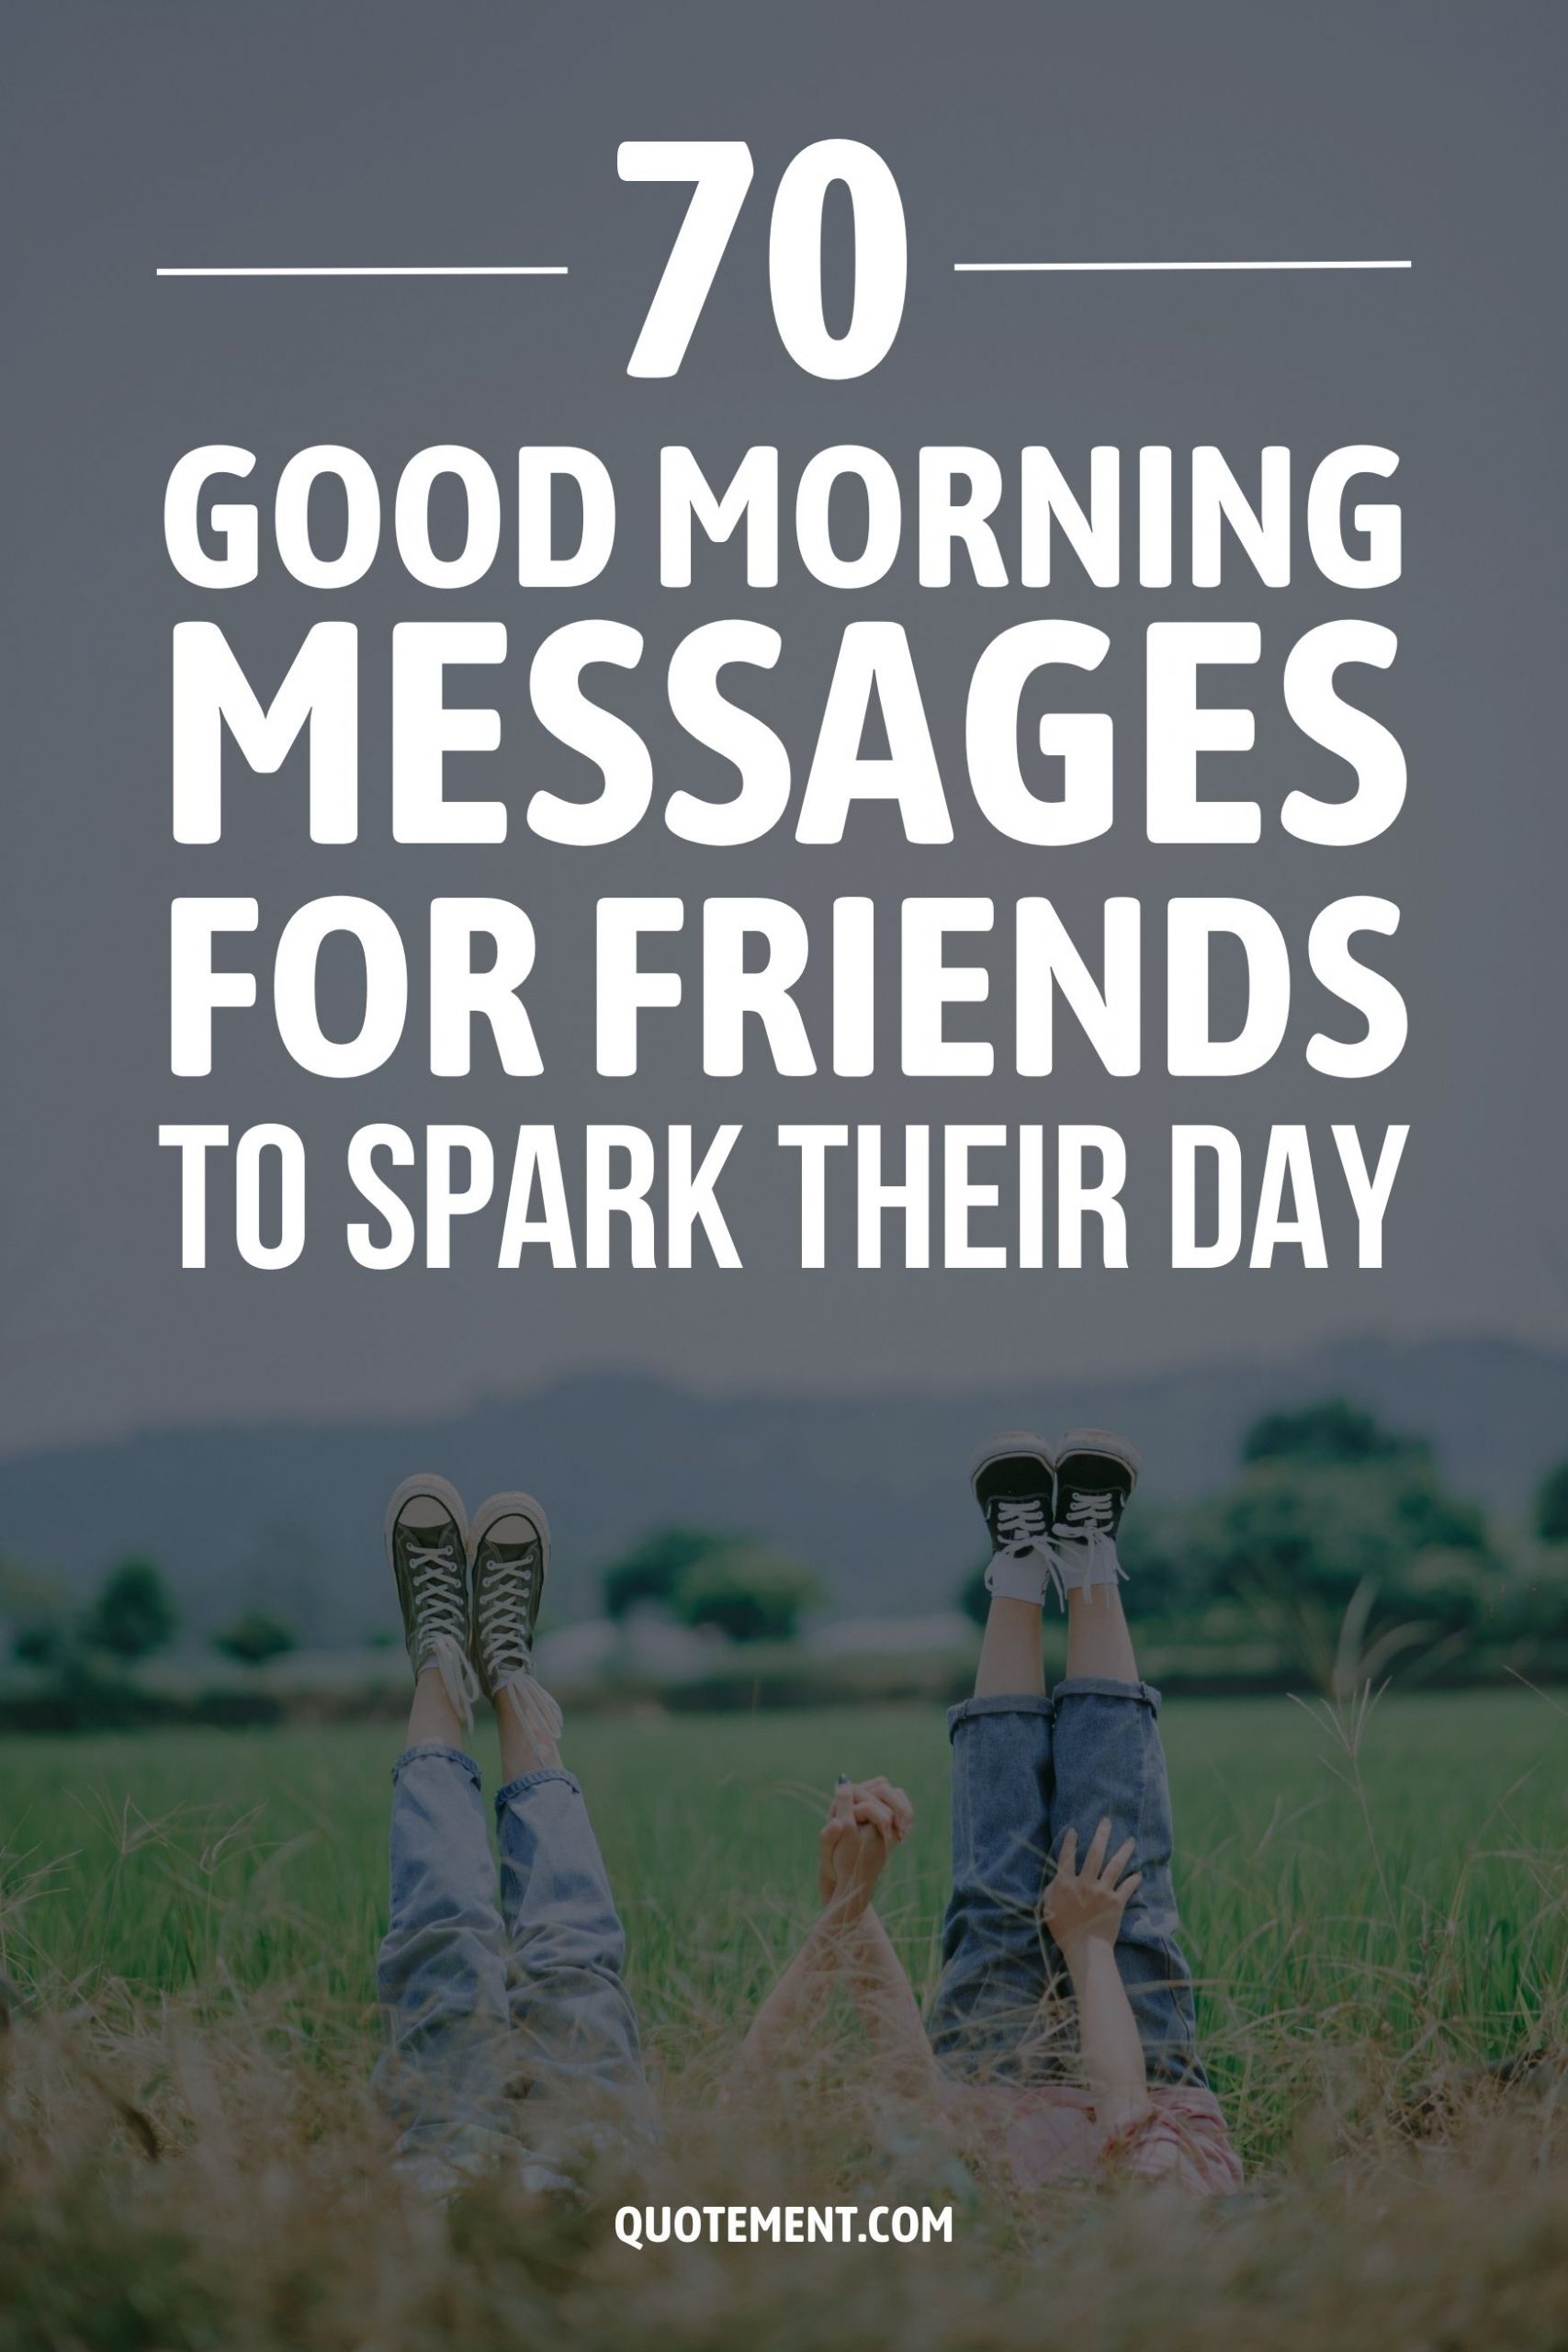 70 Good Morning Messages For Friends To Spark Their Day 